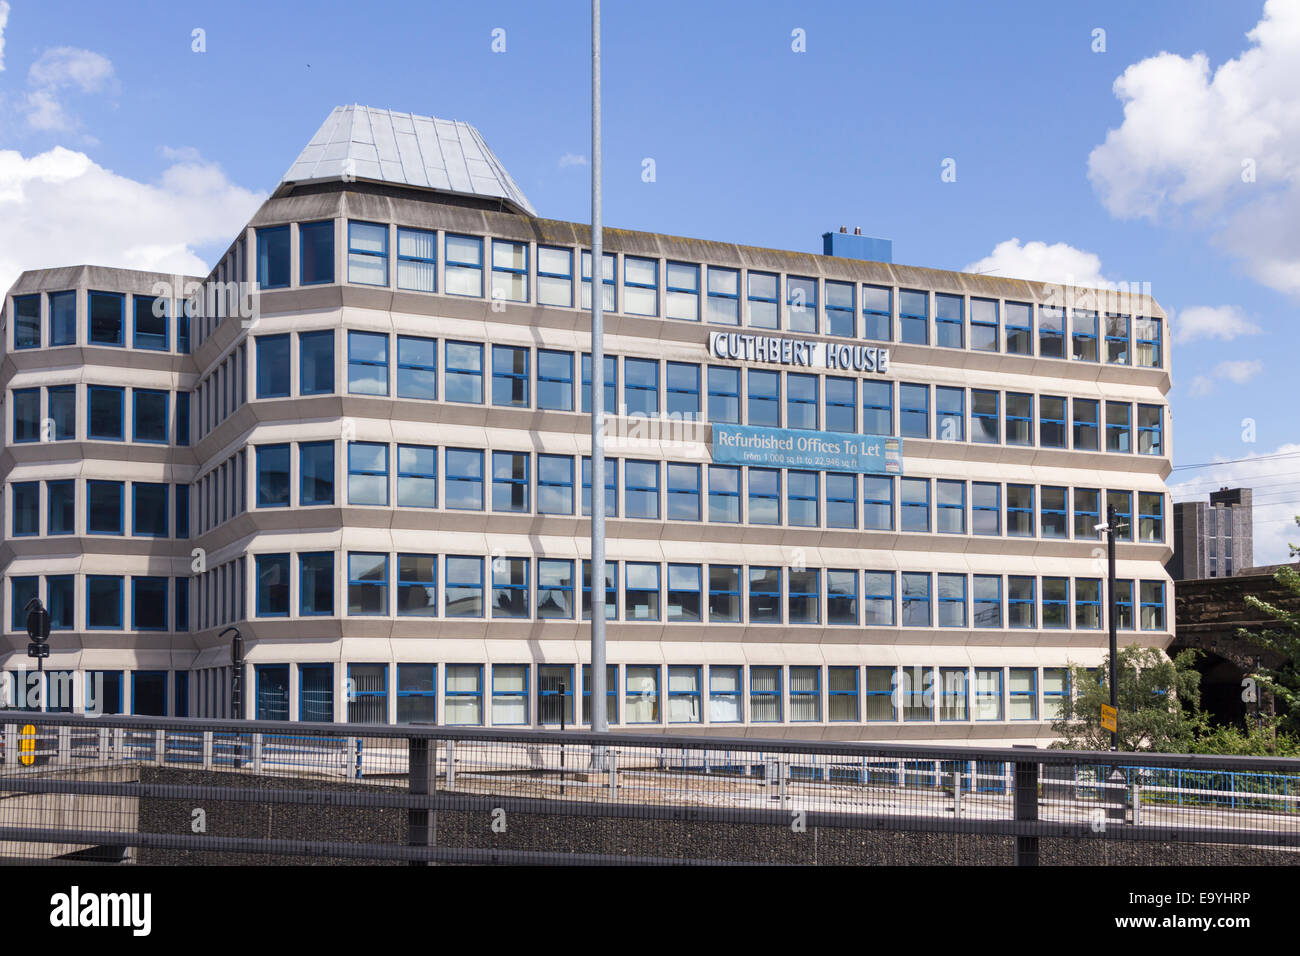 Cuthbert House, one of three office buildings forming the All Saints Business Centre, near Newcastle city centre. Stock Photo